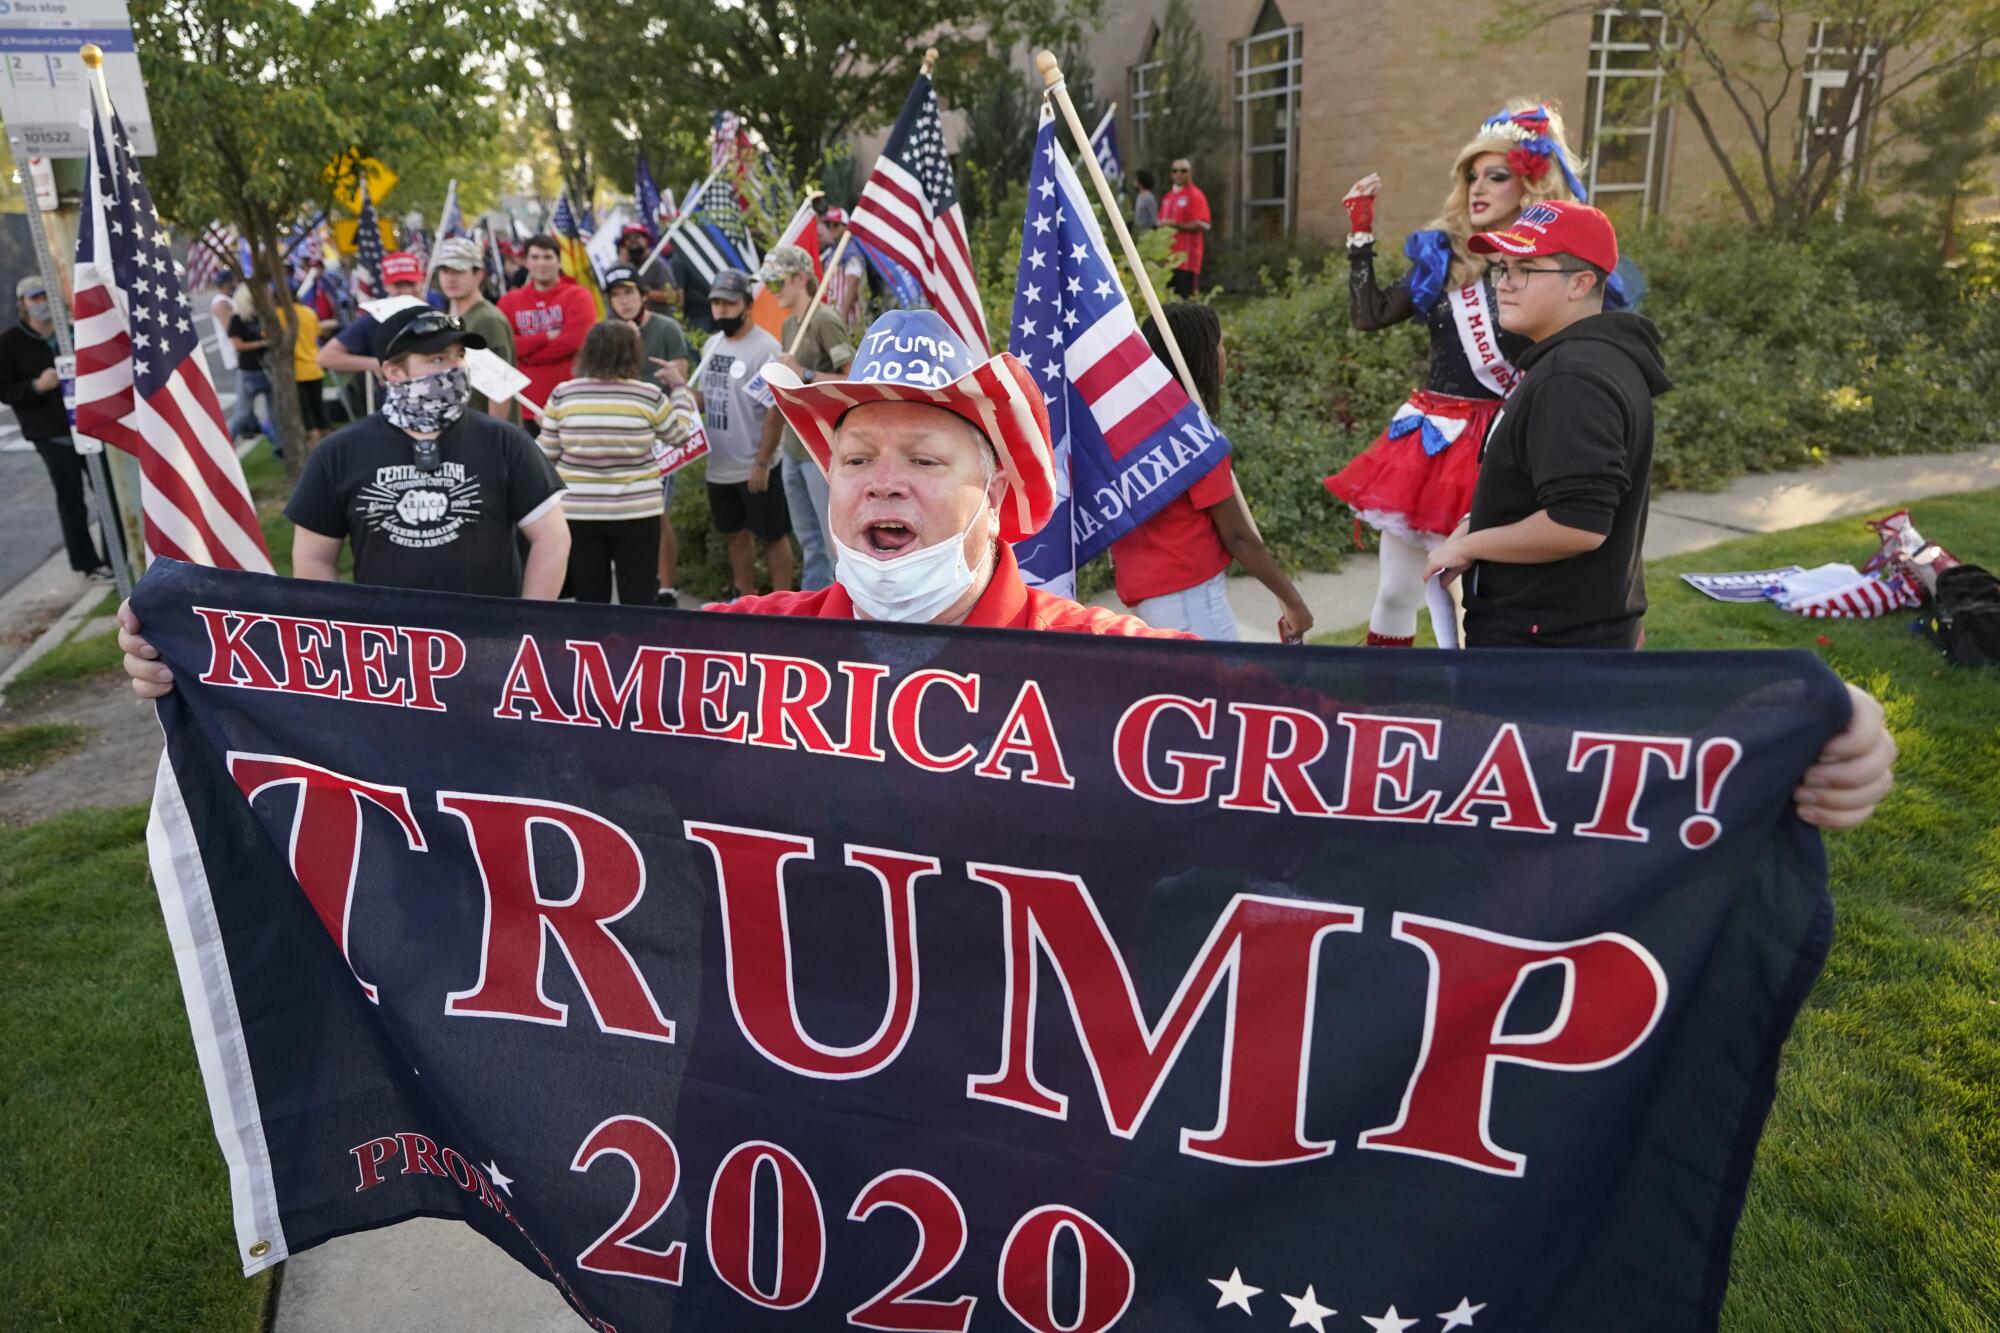 A person with a flag reading Keep America Great Trump 2020 in front of several people in U.S. flag gear